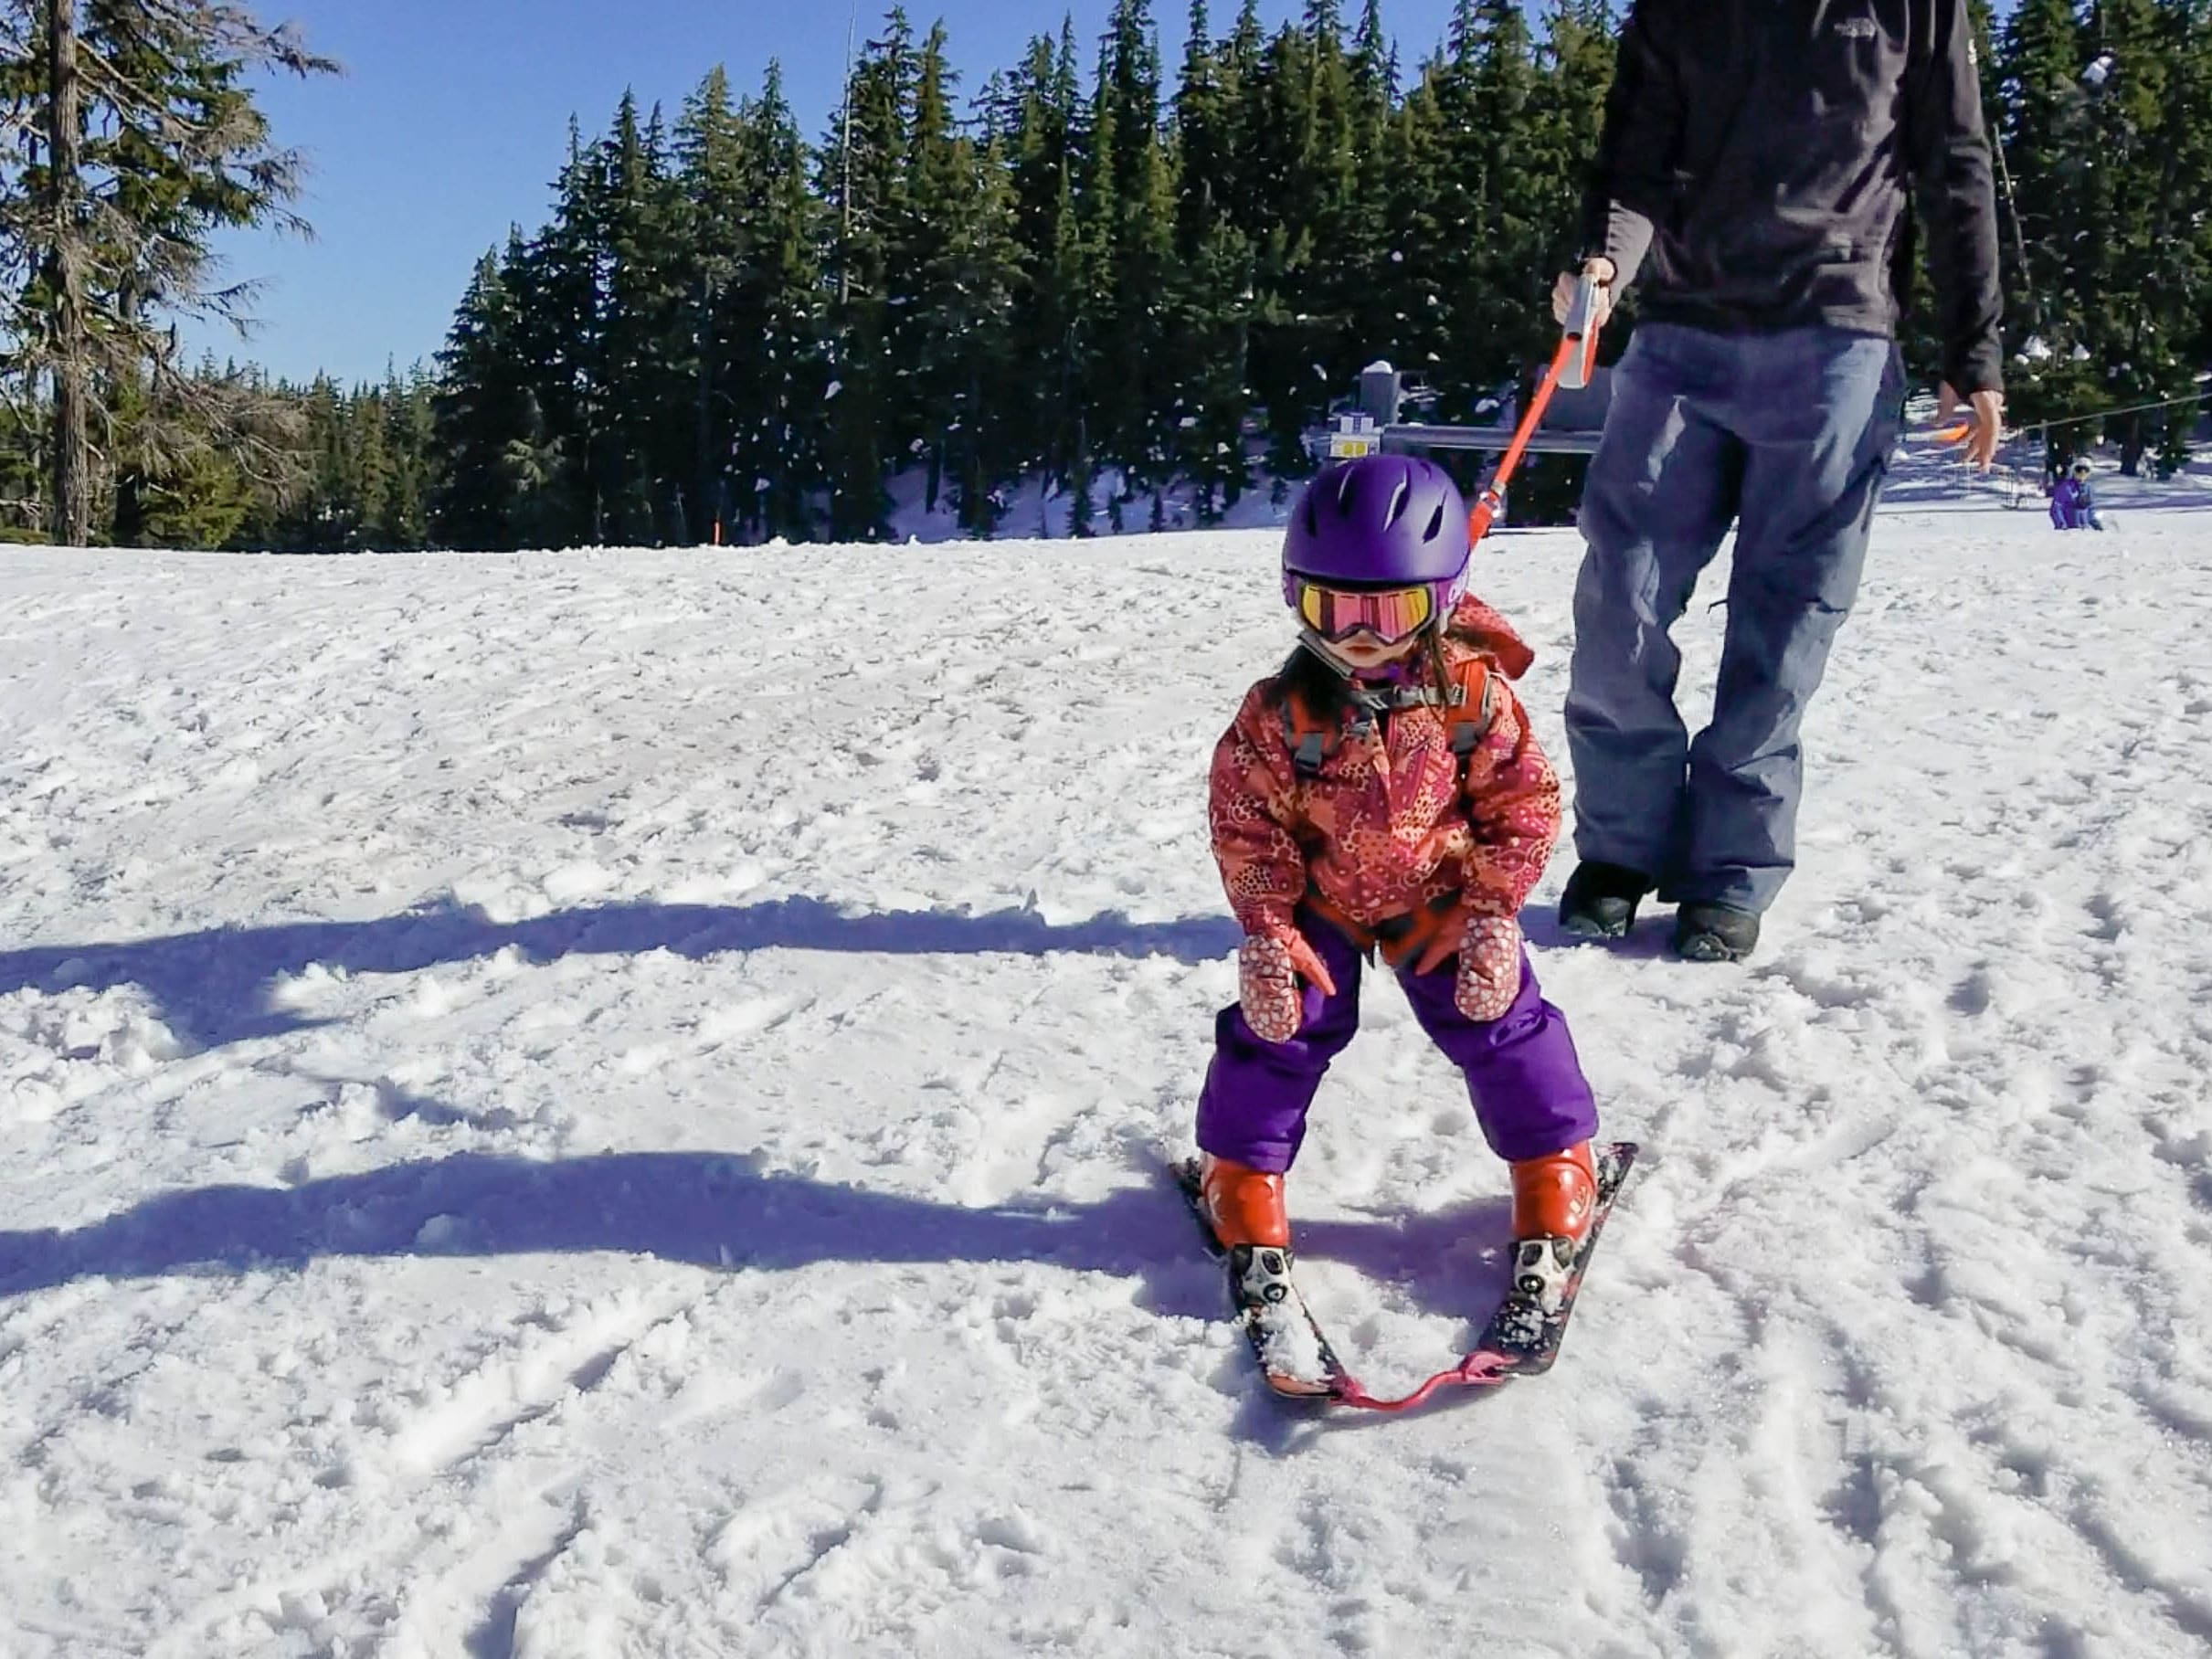 Little kids can start with skiing or snowboarding